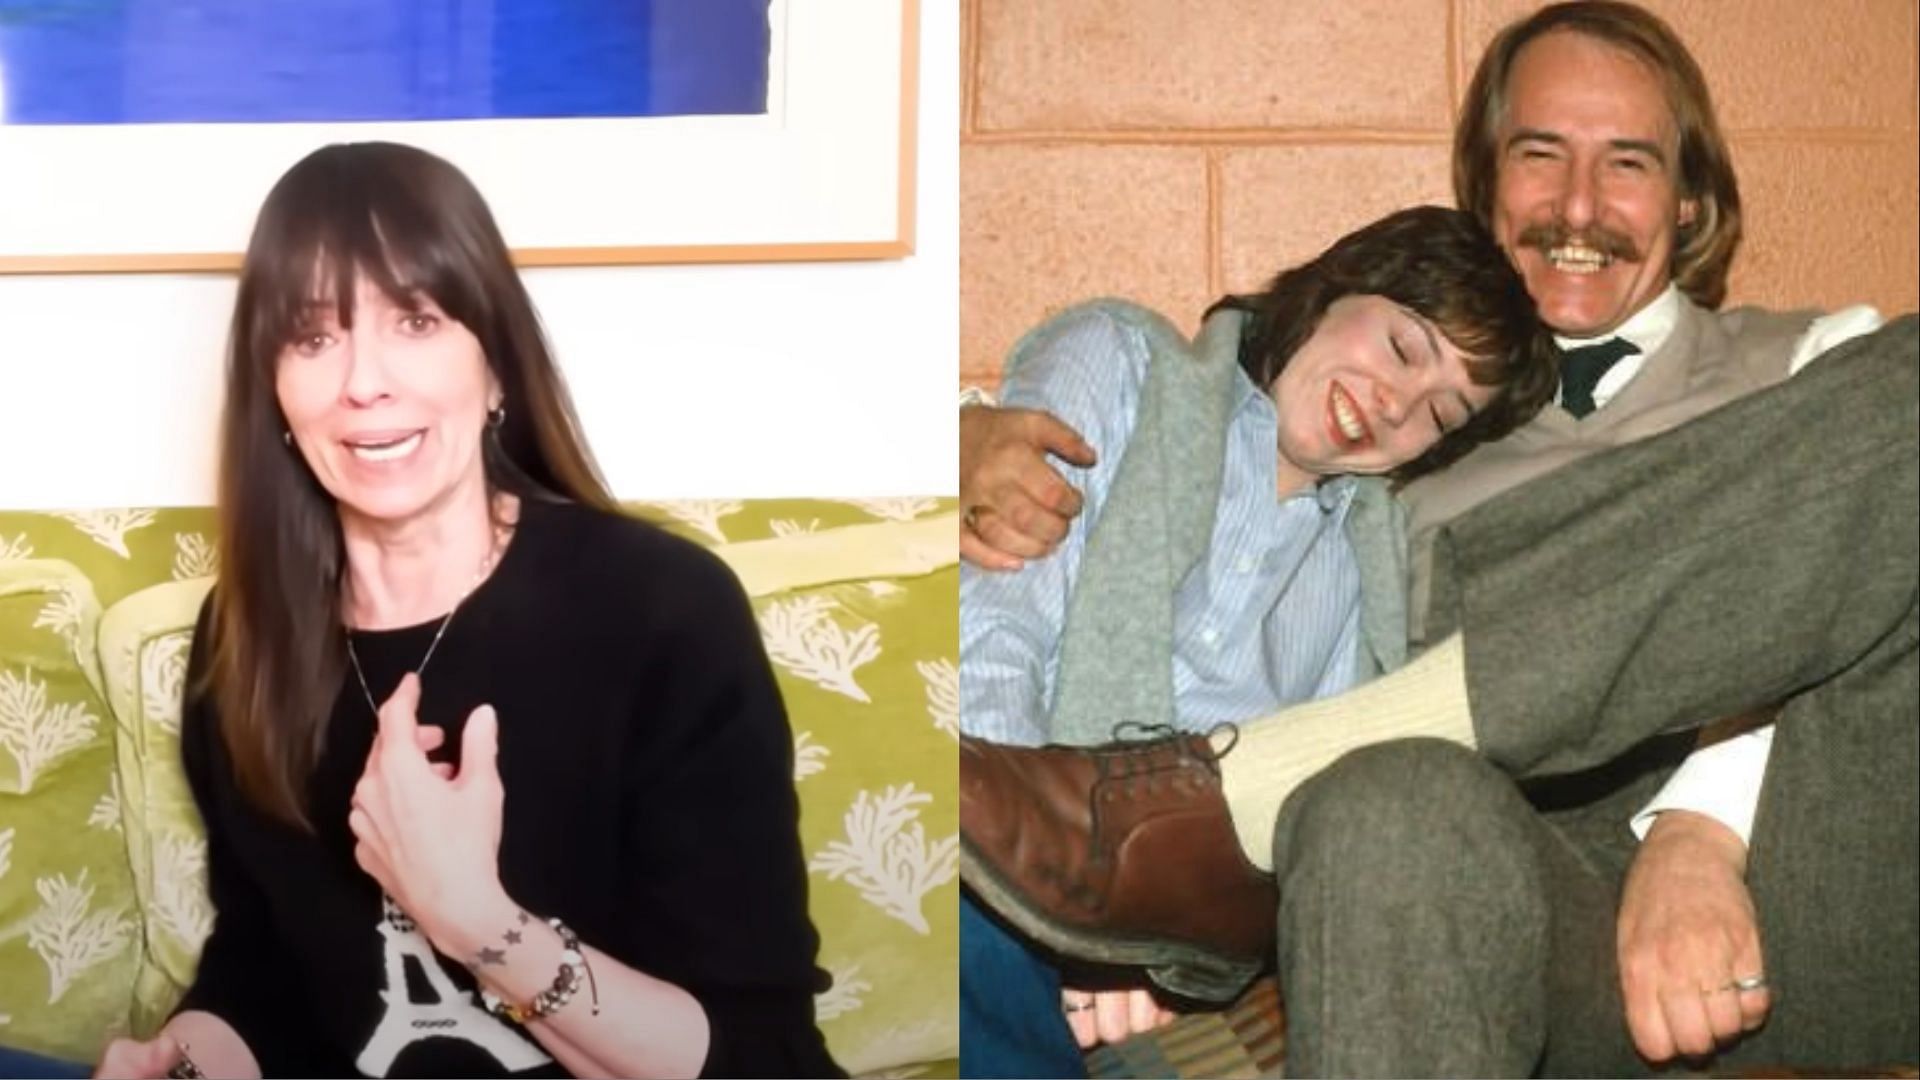 Singer Mackenzie Phillips opens up about &quot;dark&quot; side of father and The Mamas &amp; the Papas singer, John Phillips in YouTube interview (Image via Chynna Phillips Baldwin/YouTube and Pinterest) 